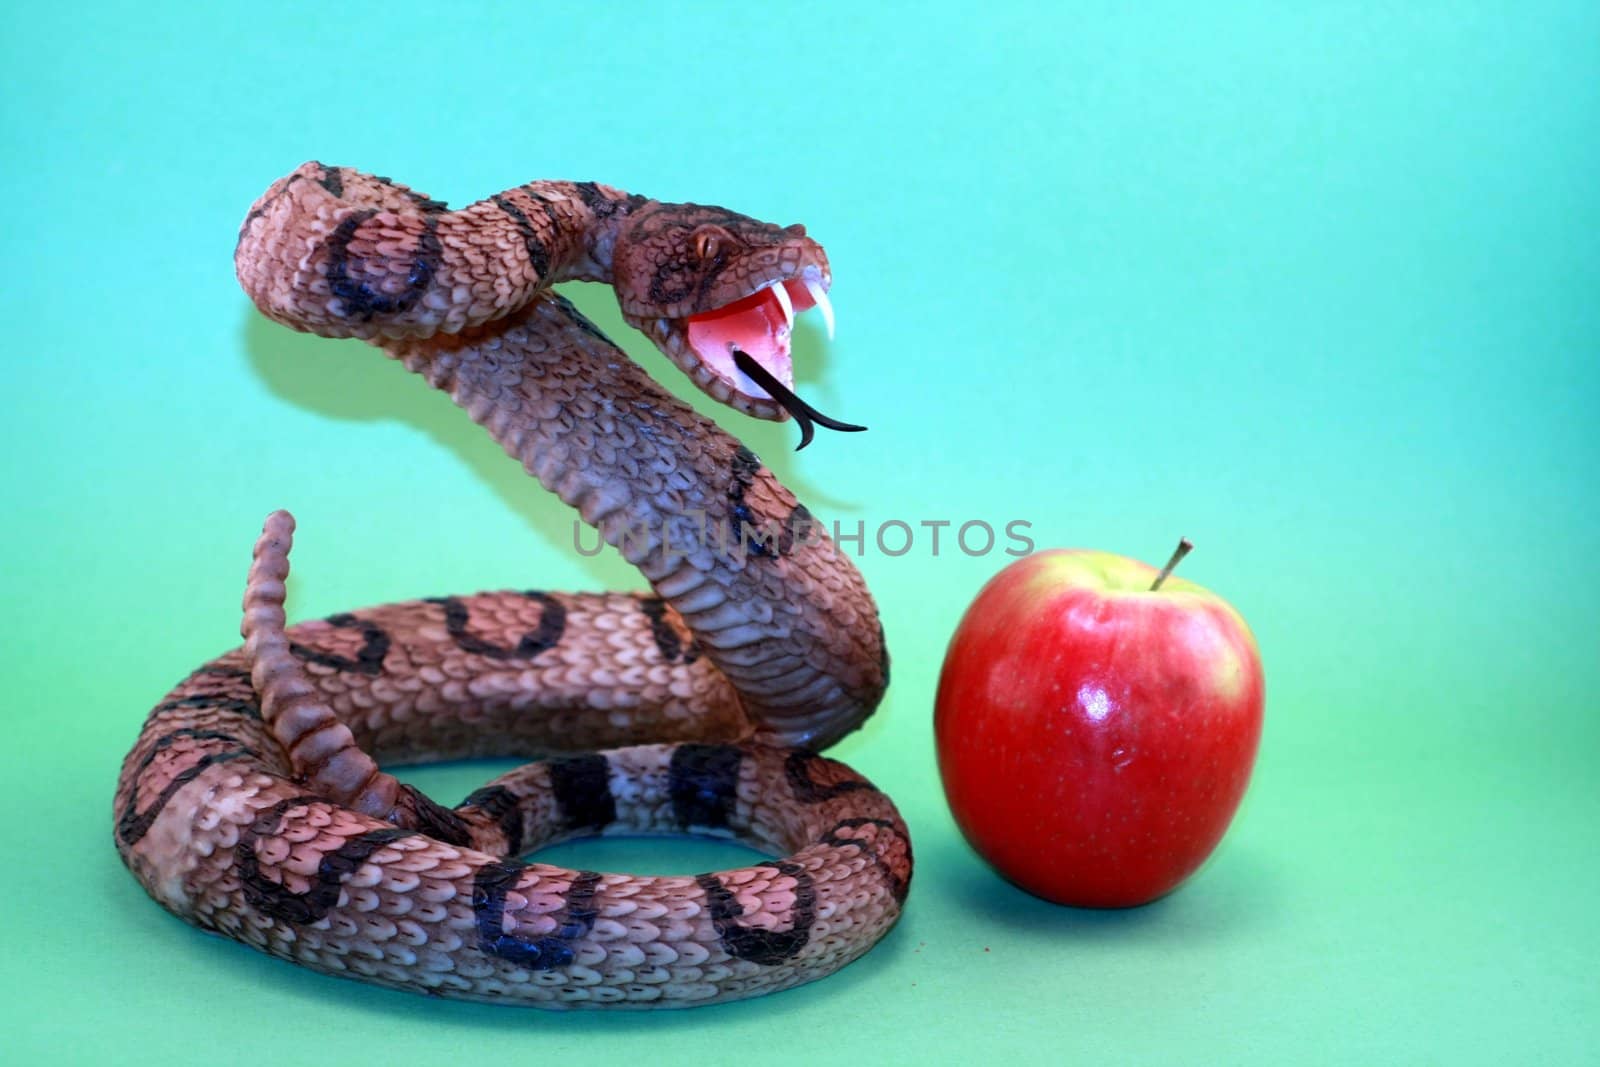 Snake and Apple in Garden with Adam and Eve by knktucker